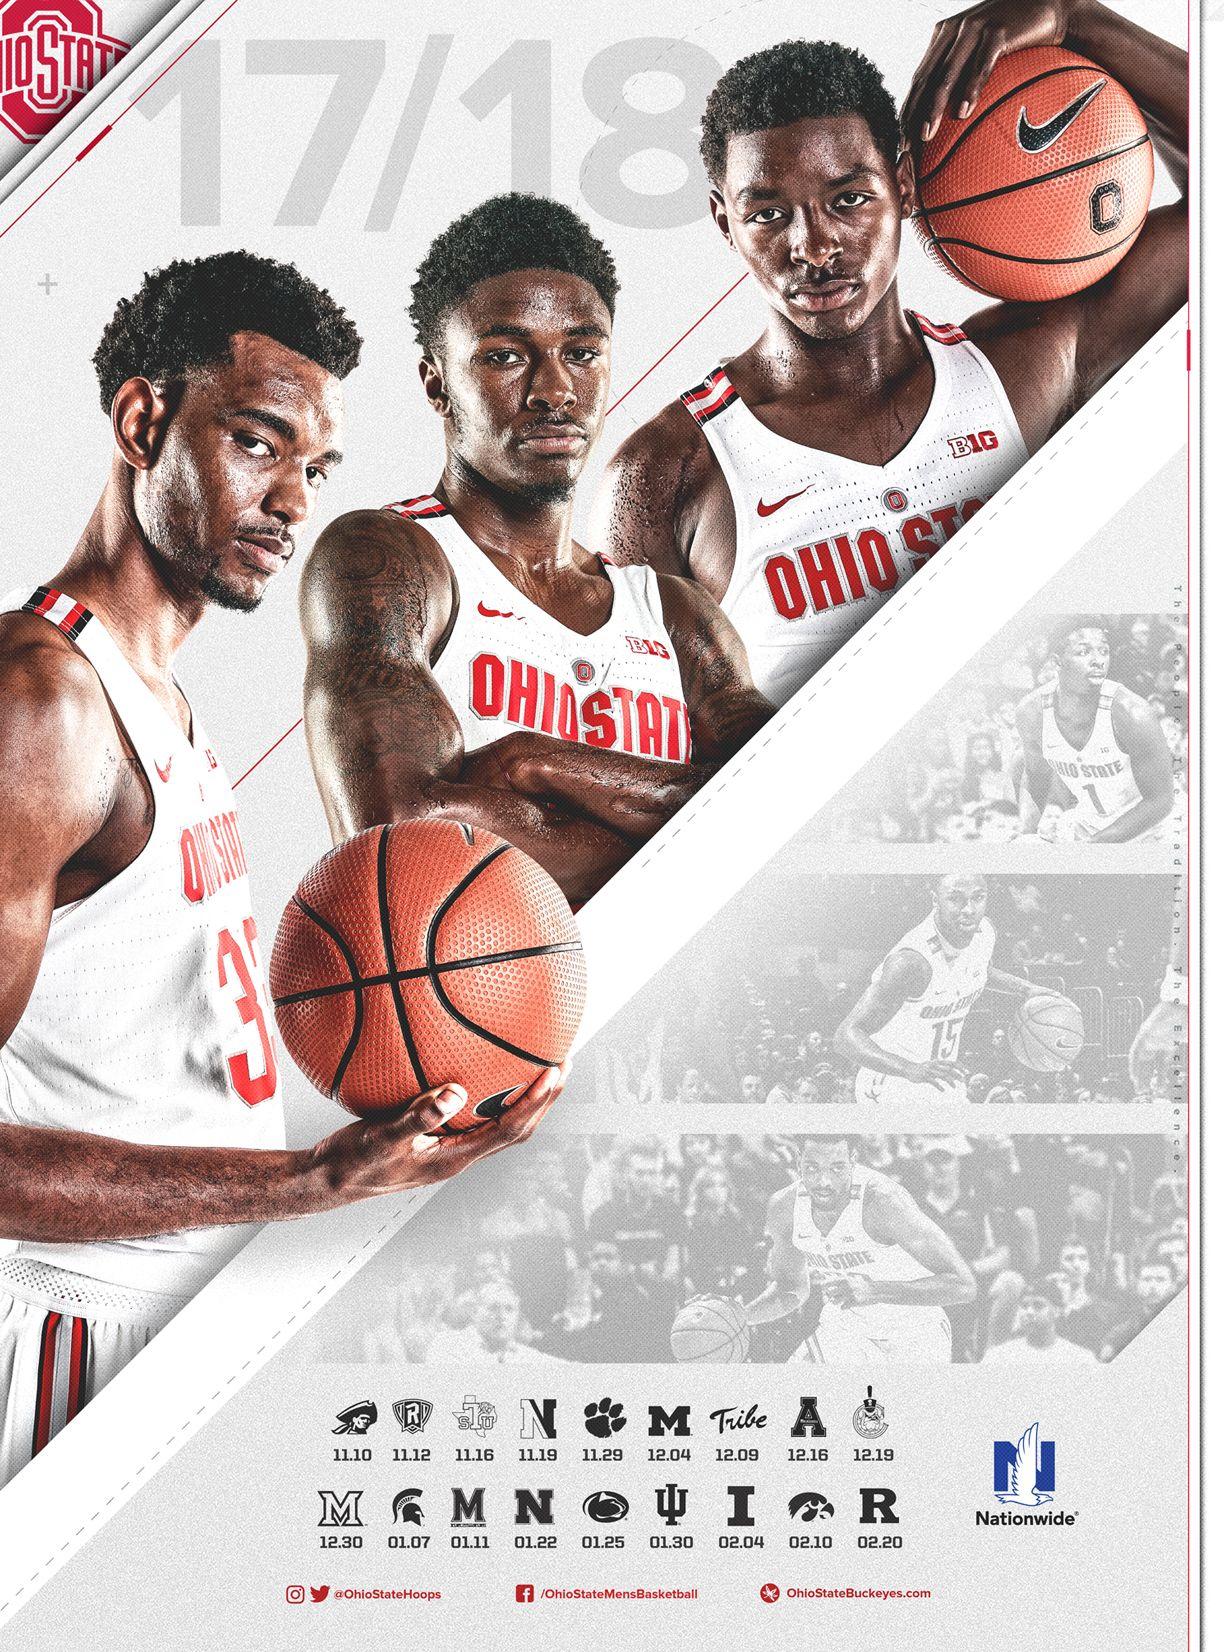 Ohio State Buckeyes Men's Basketball Wallpapers Wallpaper Cave